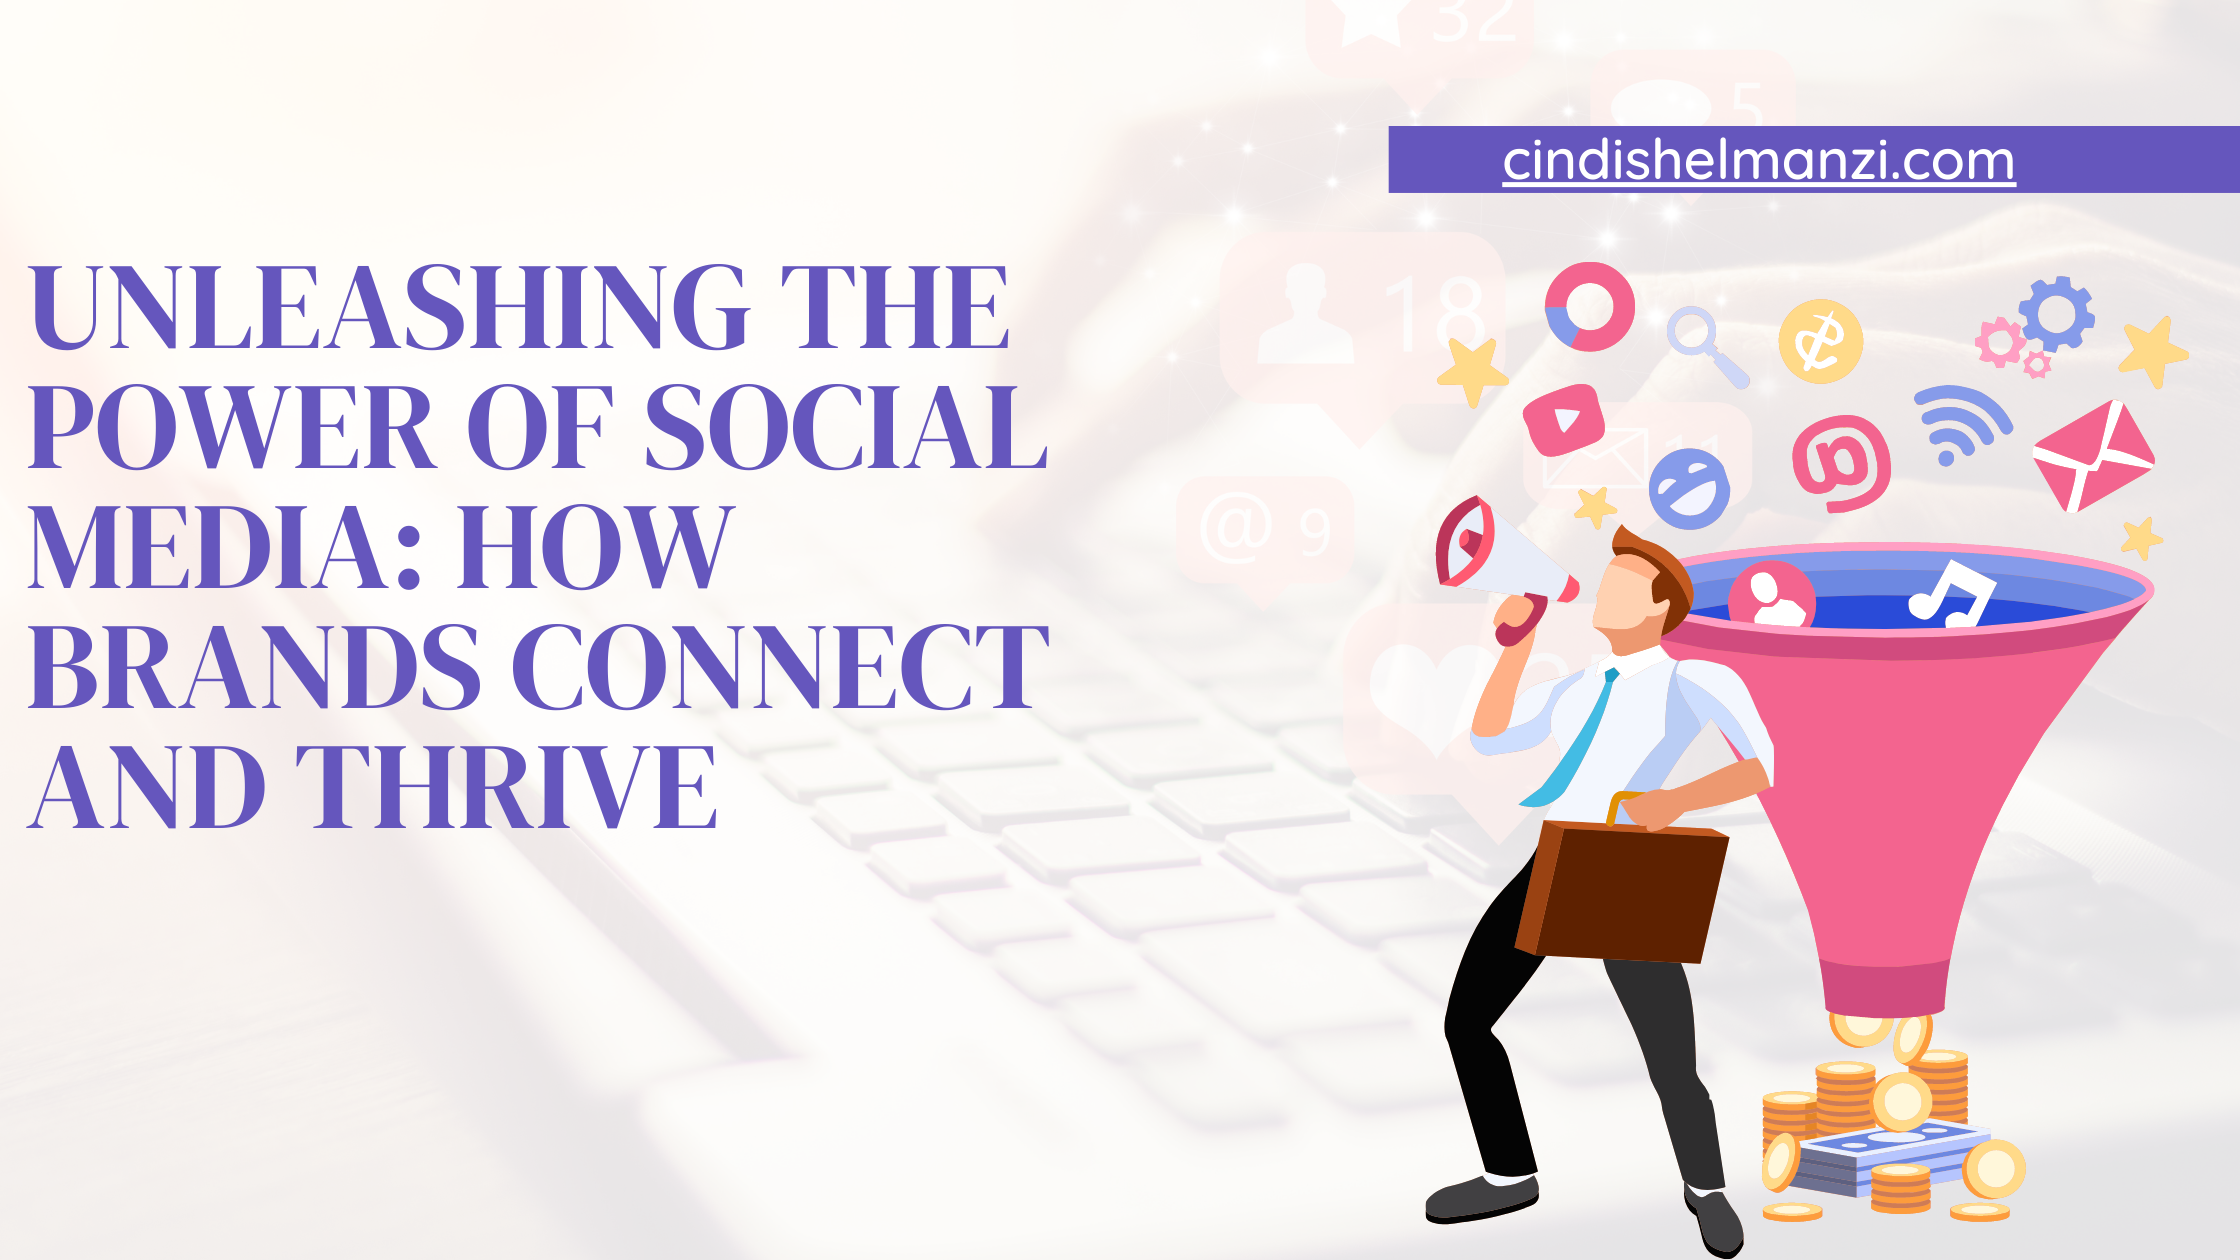 Unleashing the Power of Social Media: How Brands Connect and Thrive